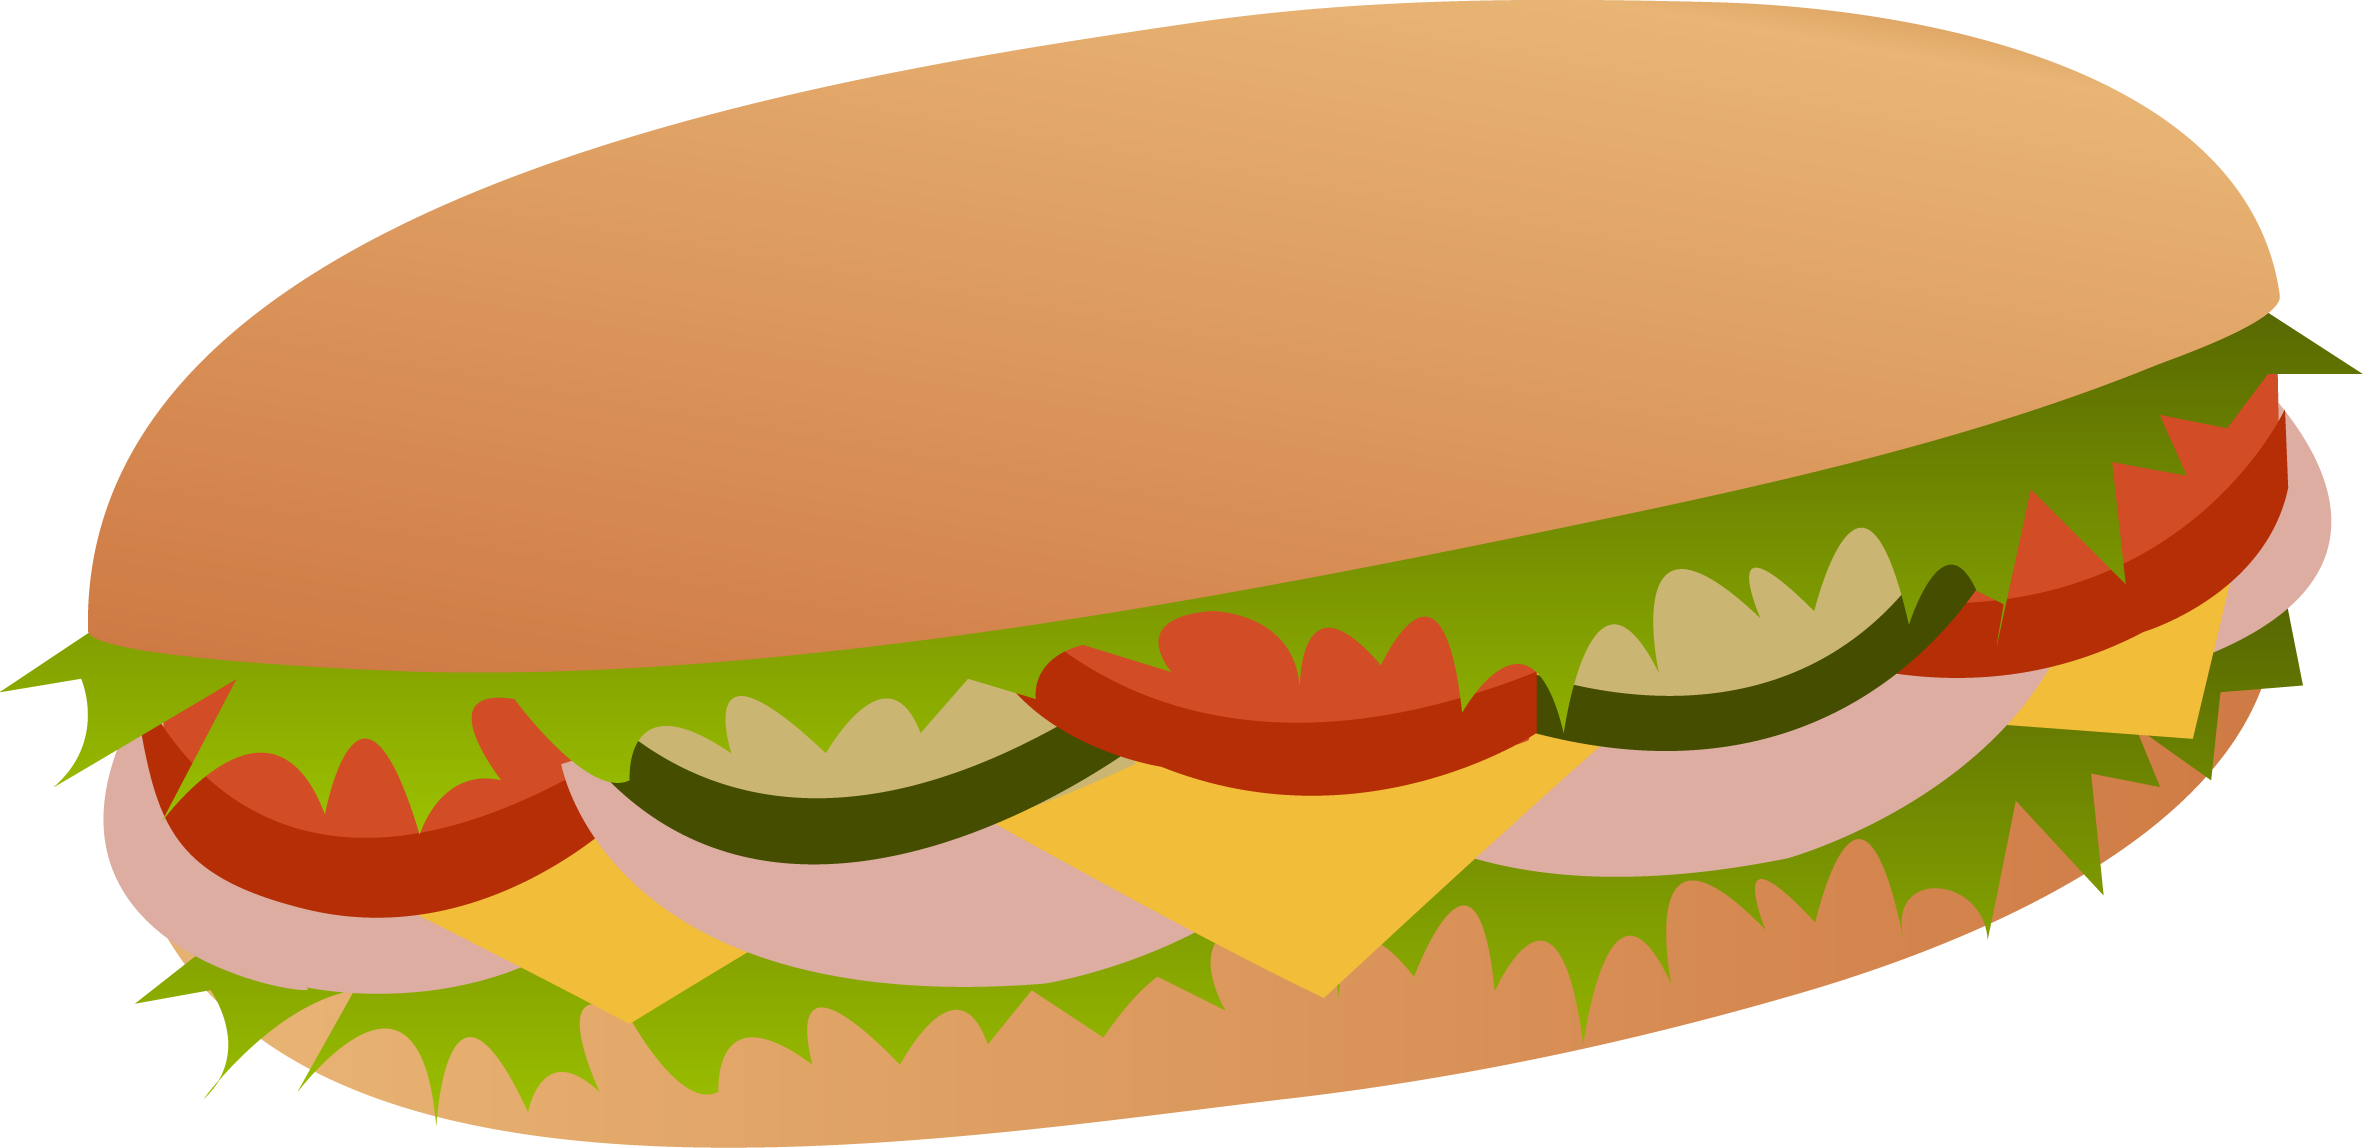 48 Images Of Cartoon Sub Sandwich   You Can Use These Free Cliparts